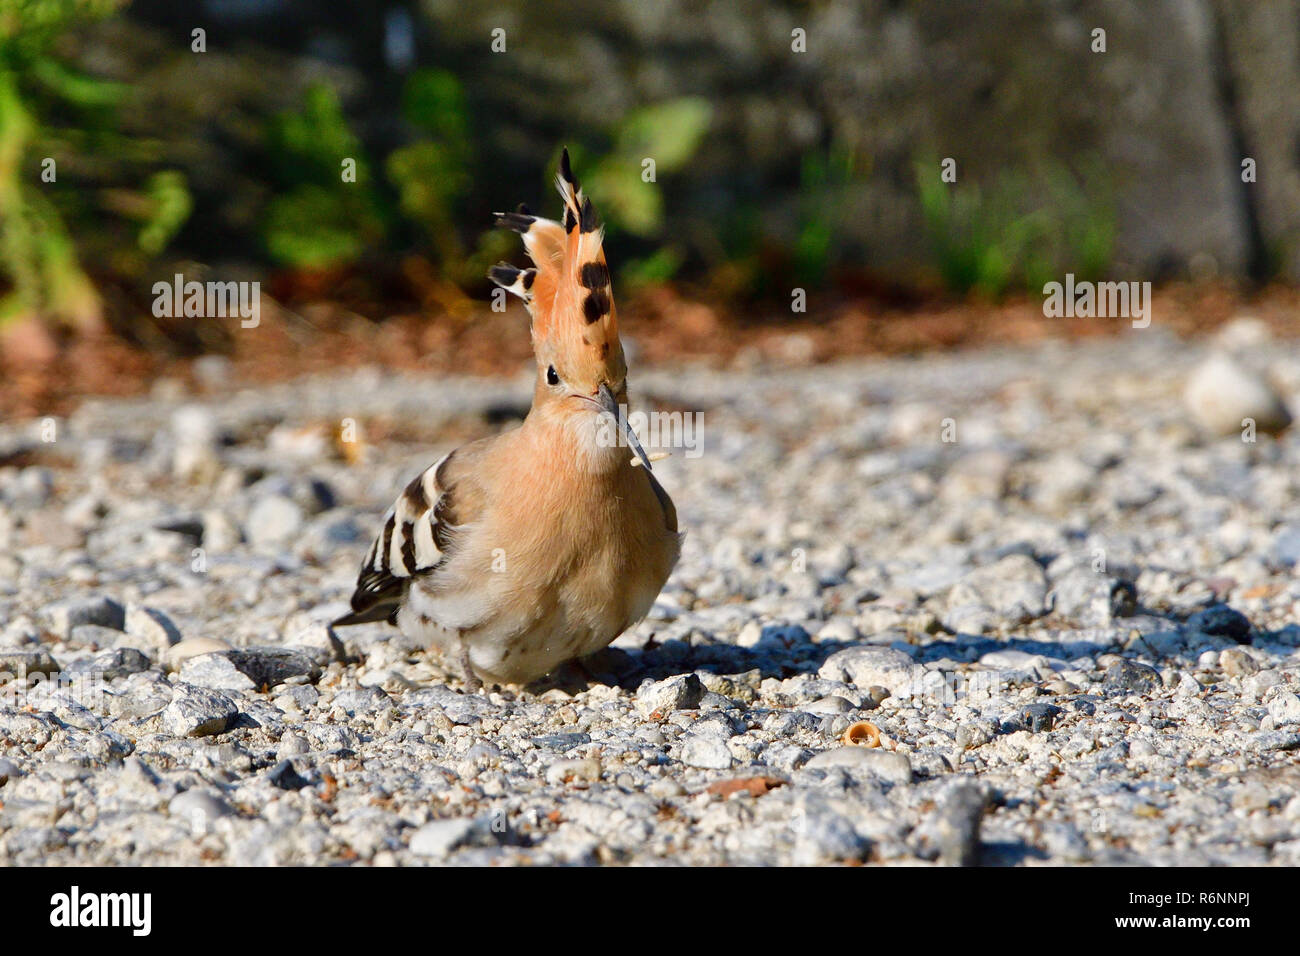 hoopoe in the foraging Stock Photo